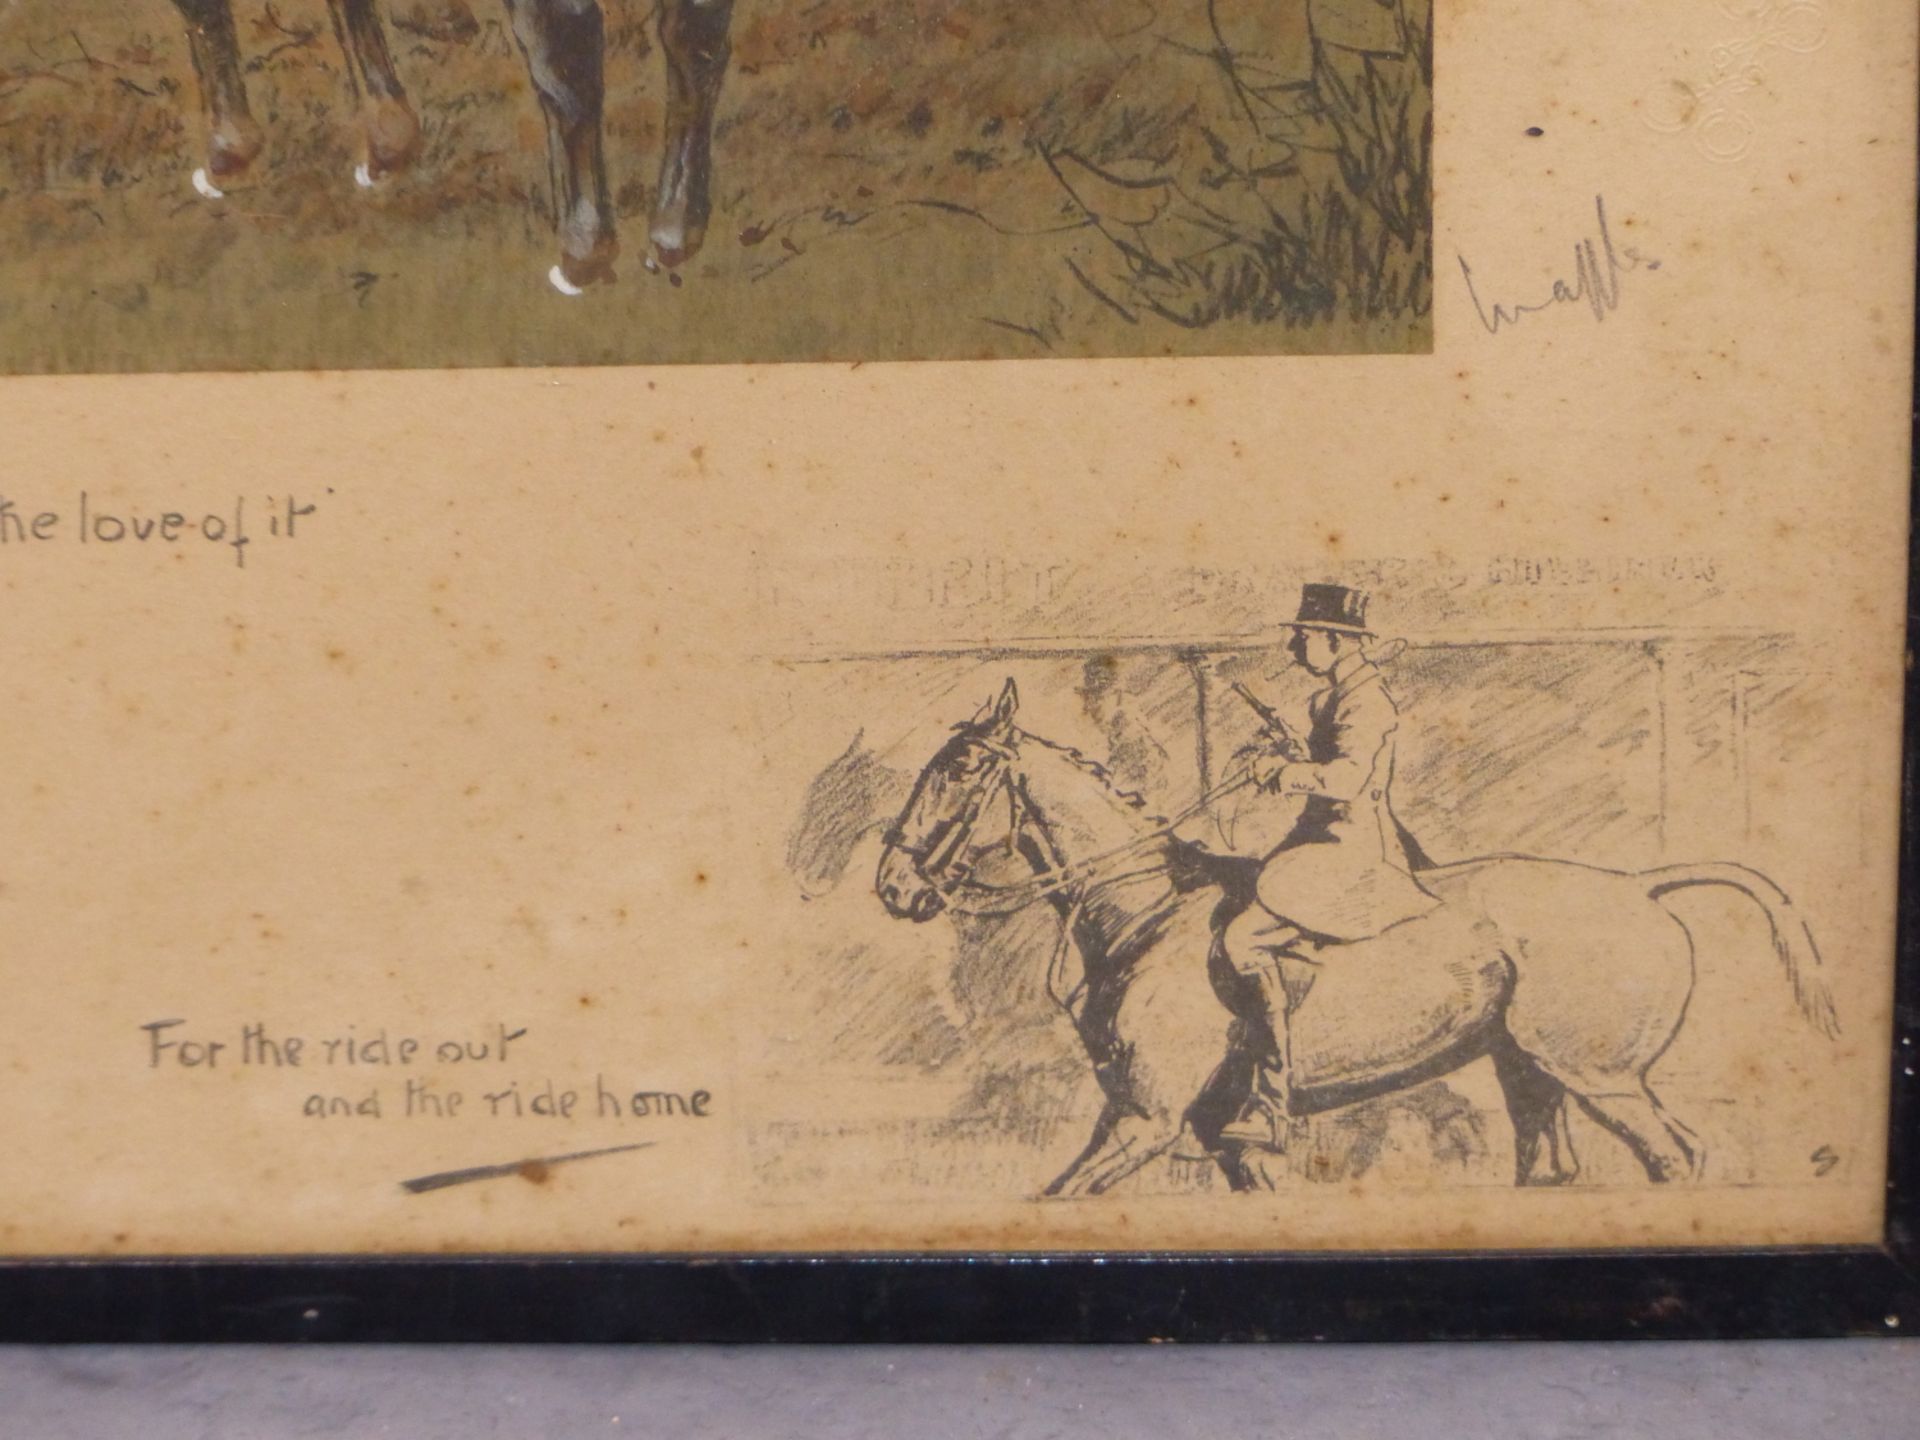 SNAFFLES- CHARLES JOHNSON PAYNE. "FOXCATCHERS" WITH REMARQUE "FOR THE RIDE OUT AND THE RIDE HOME". - Image 4 of 9